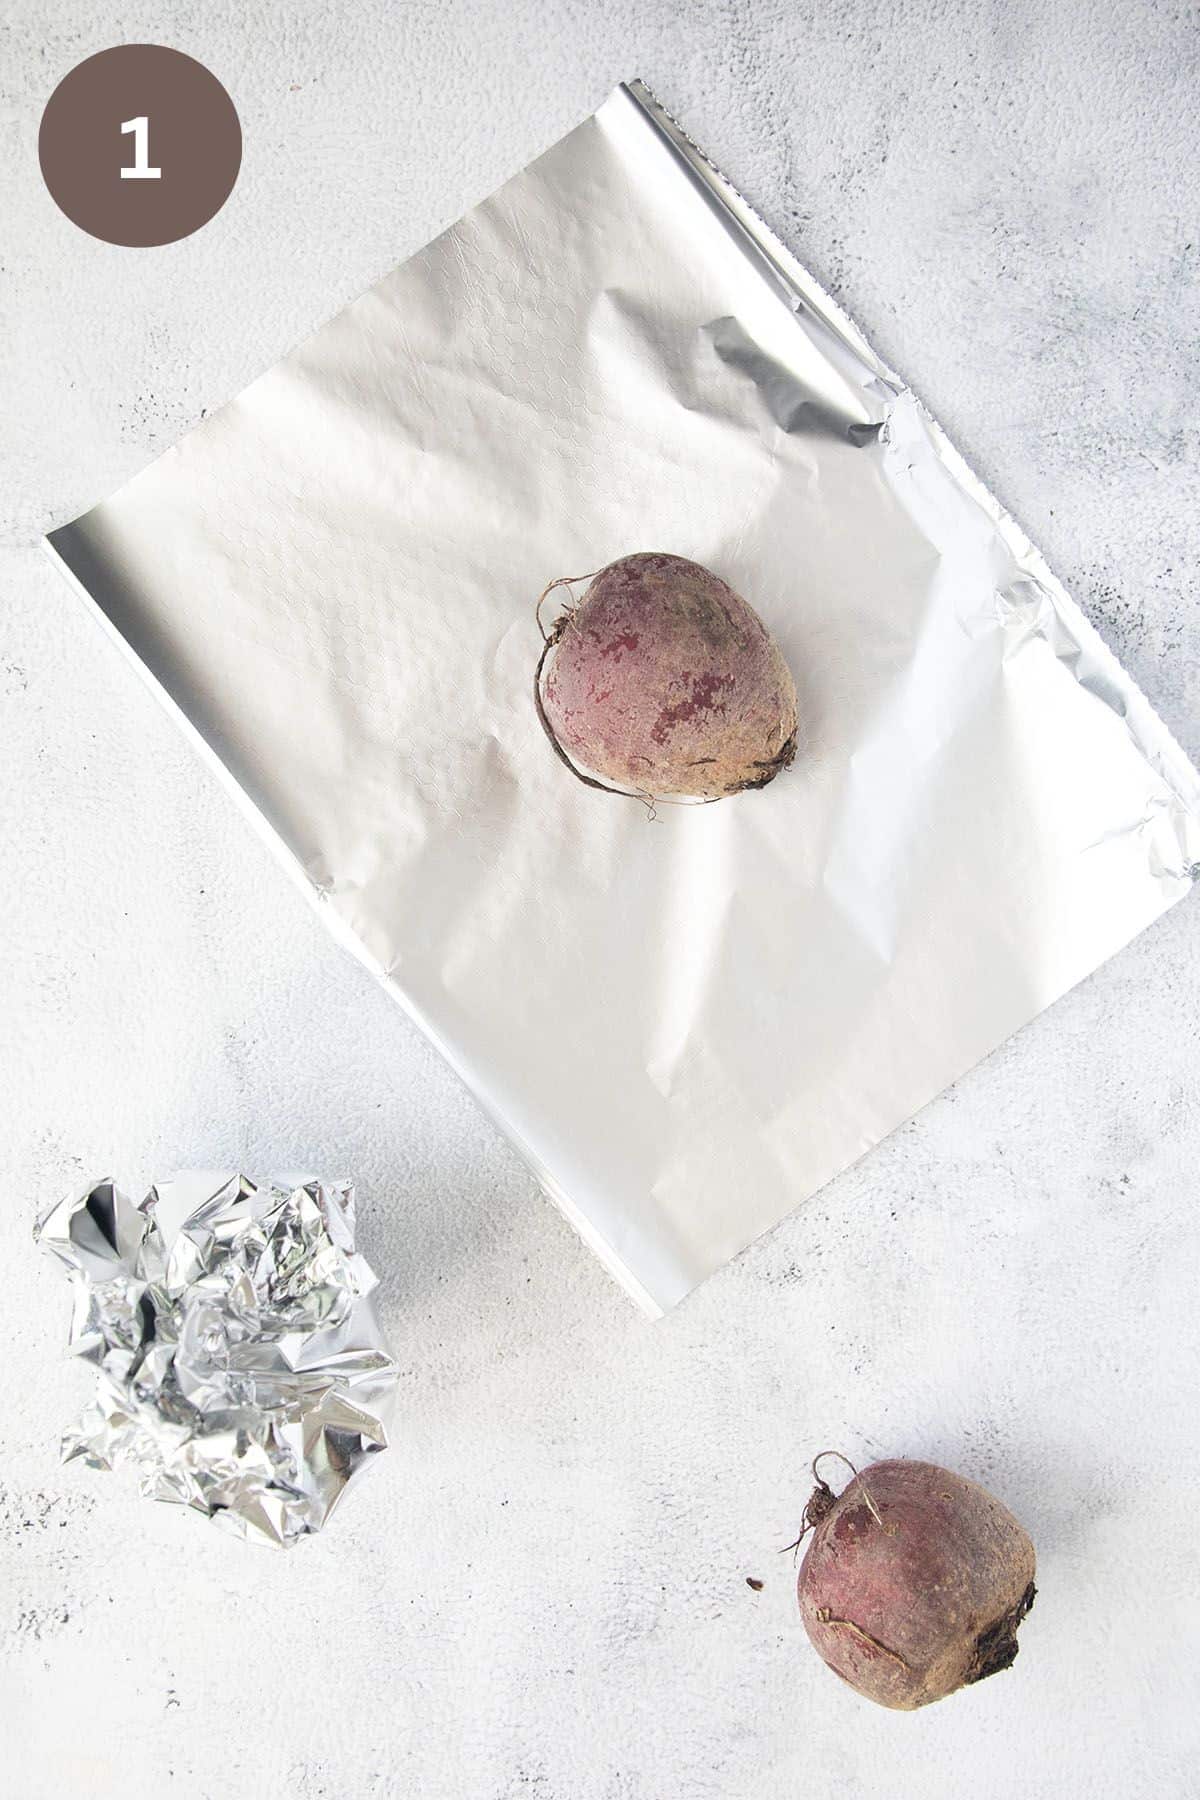 wrapping raw beets in aluminum foil.